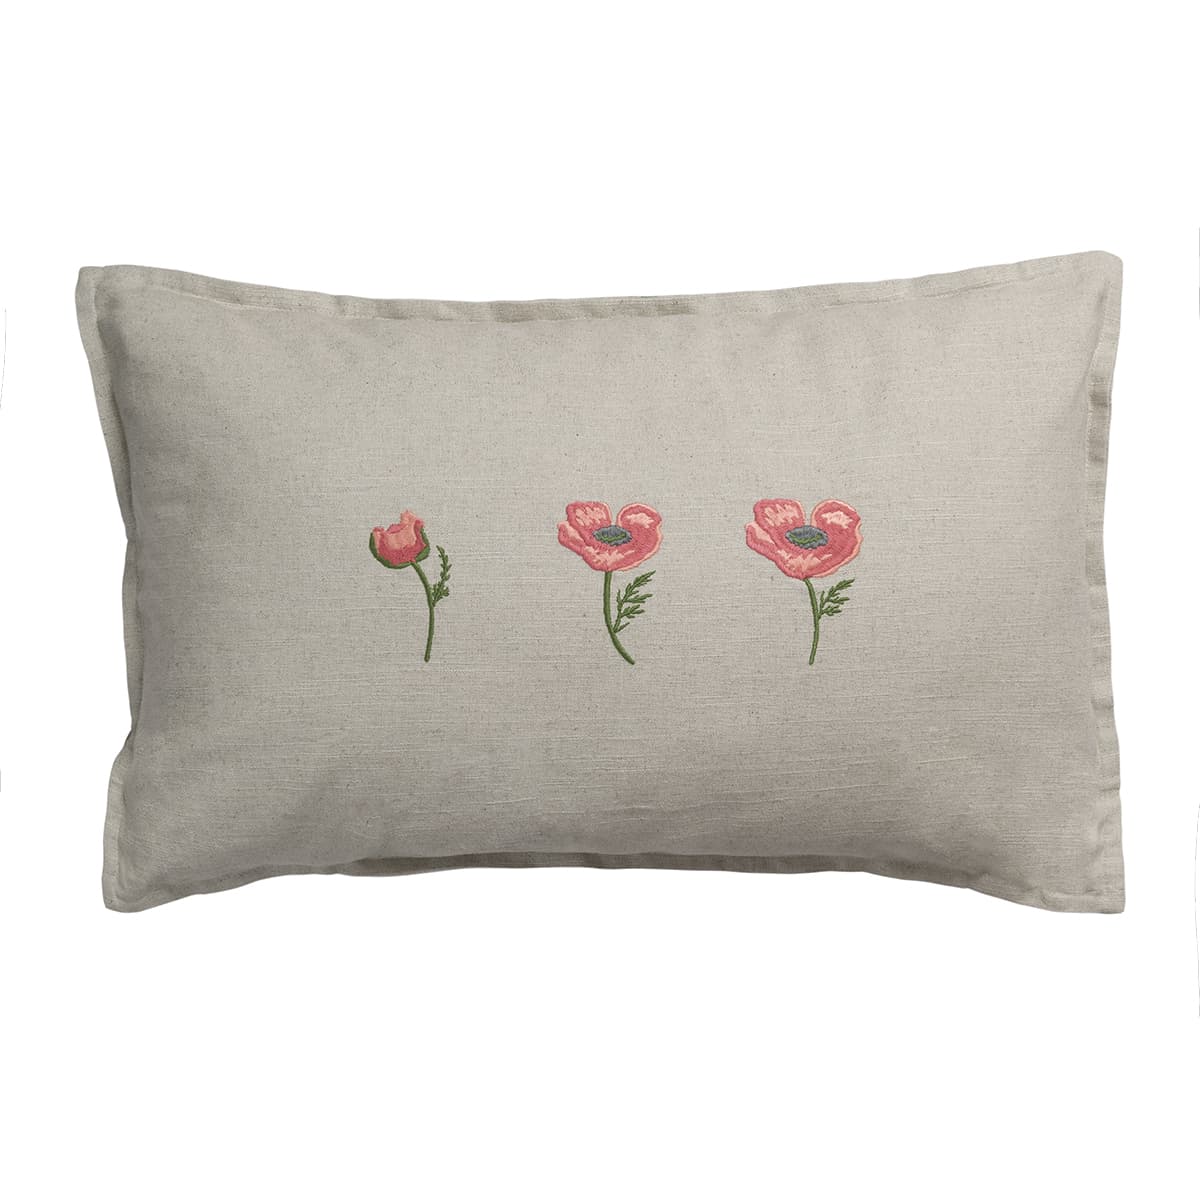 Poppy Meadow Linen Blend Embroidered Cushion